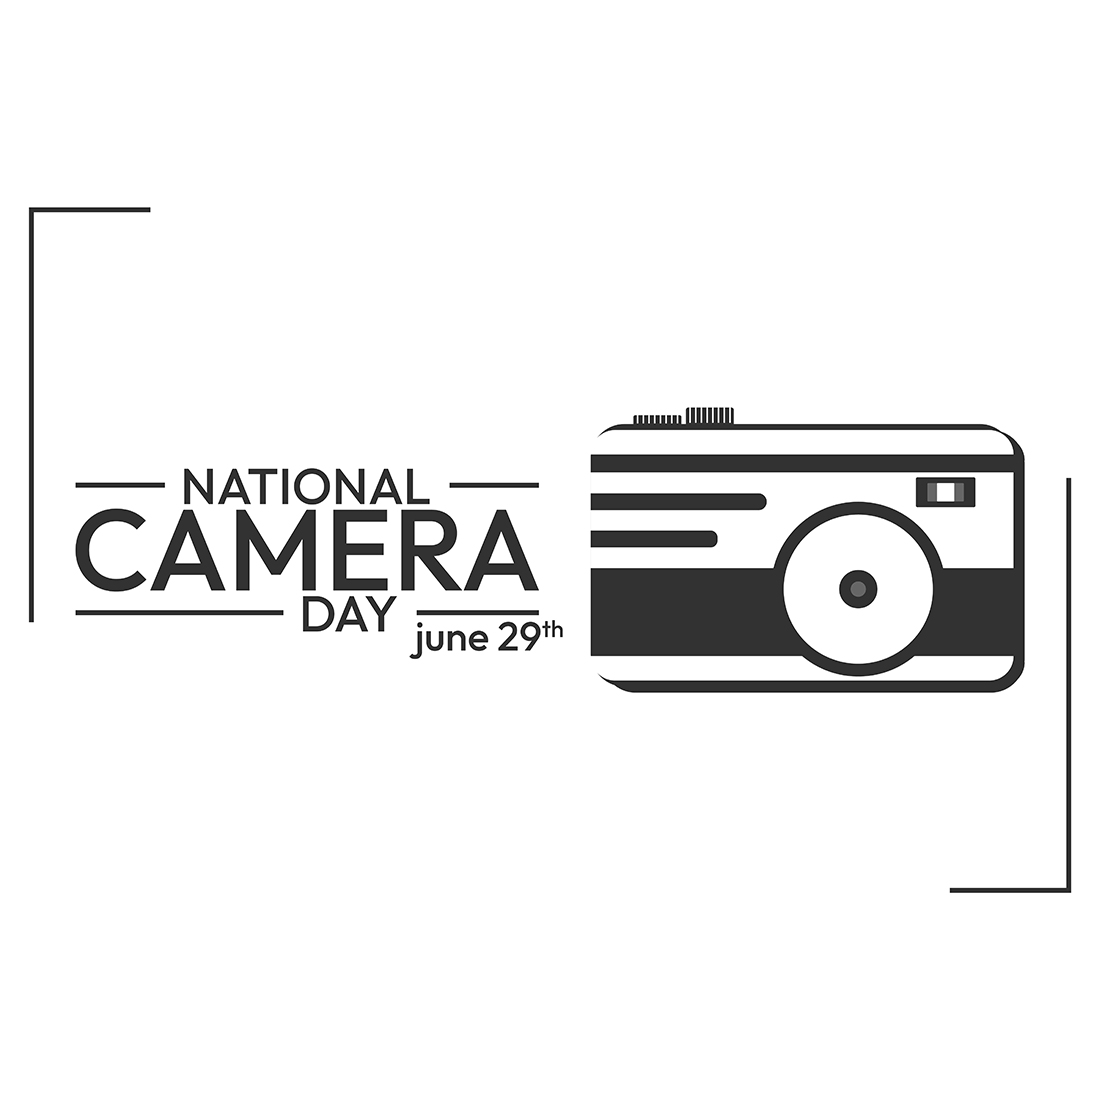 National Camera Day preview image.